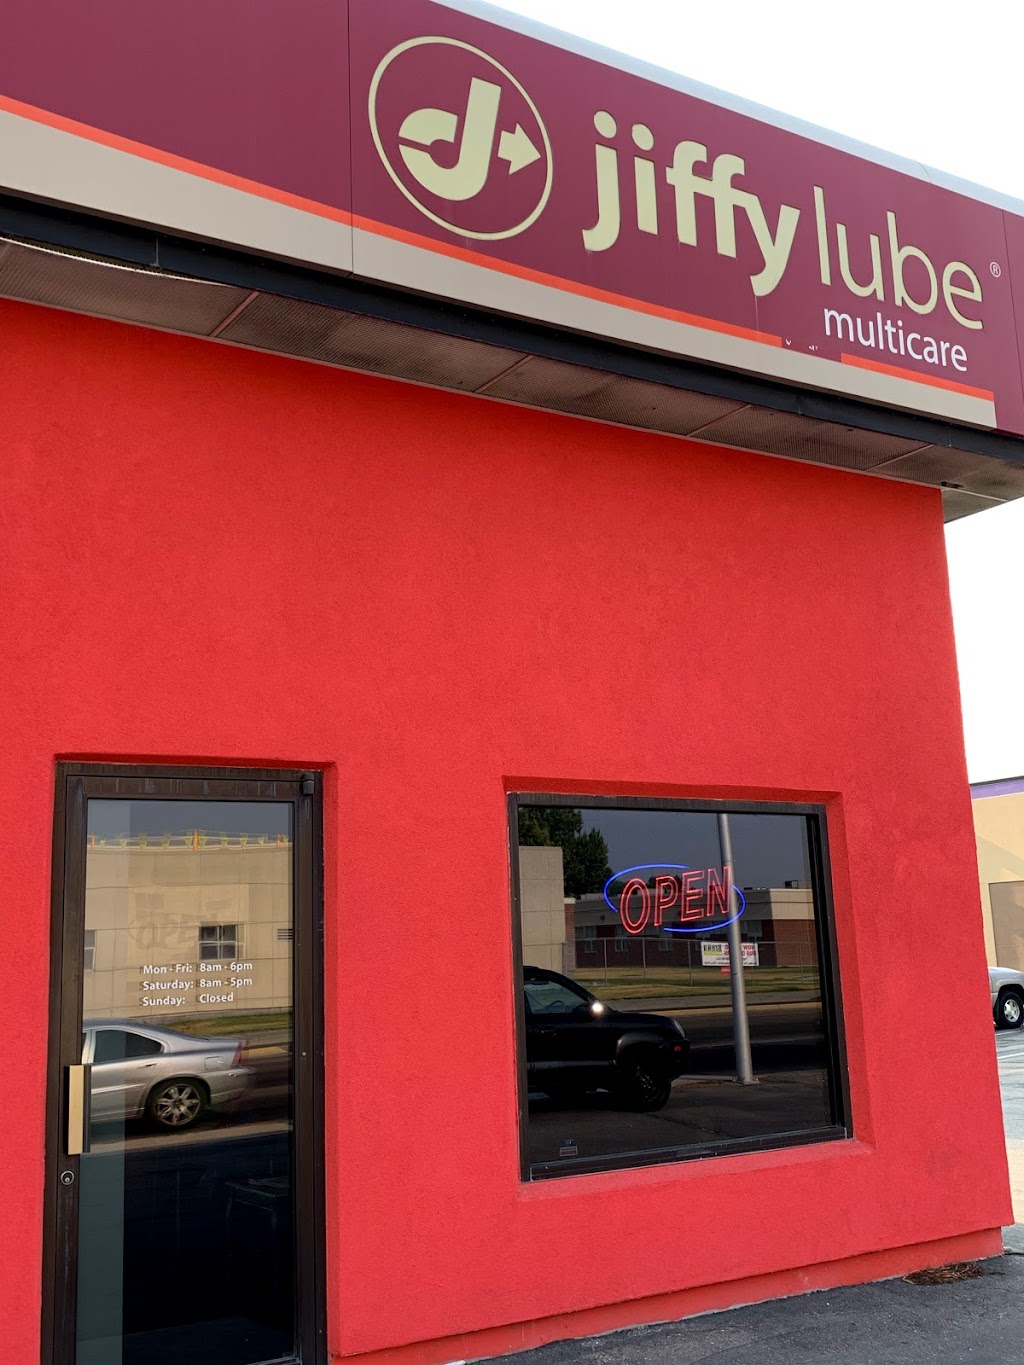 Jiffy Lube Oil Change and Repair | 824 12th Ave Rd, Nampa, ID 83686 | Phone: (208) 465-4431